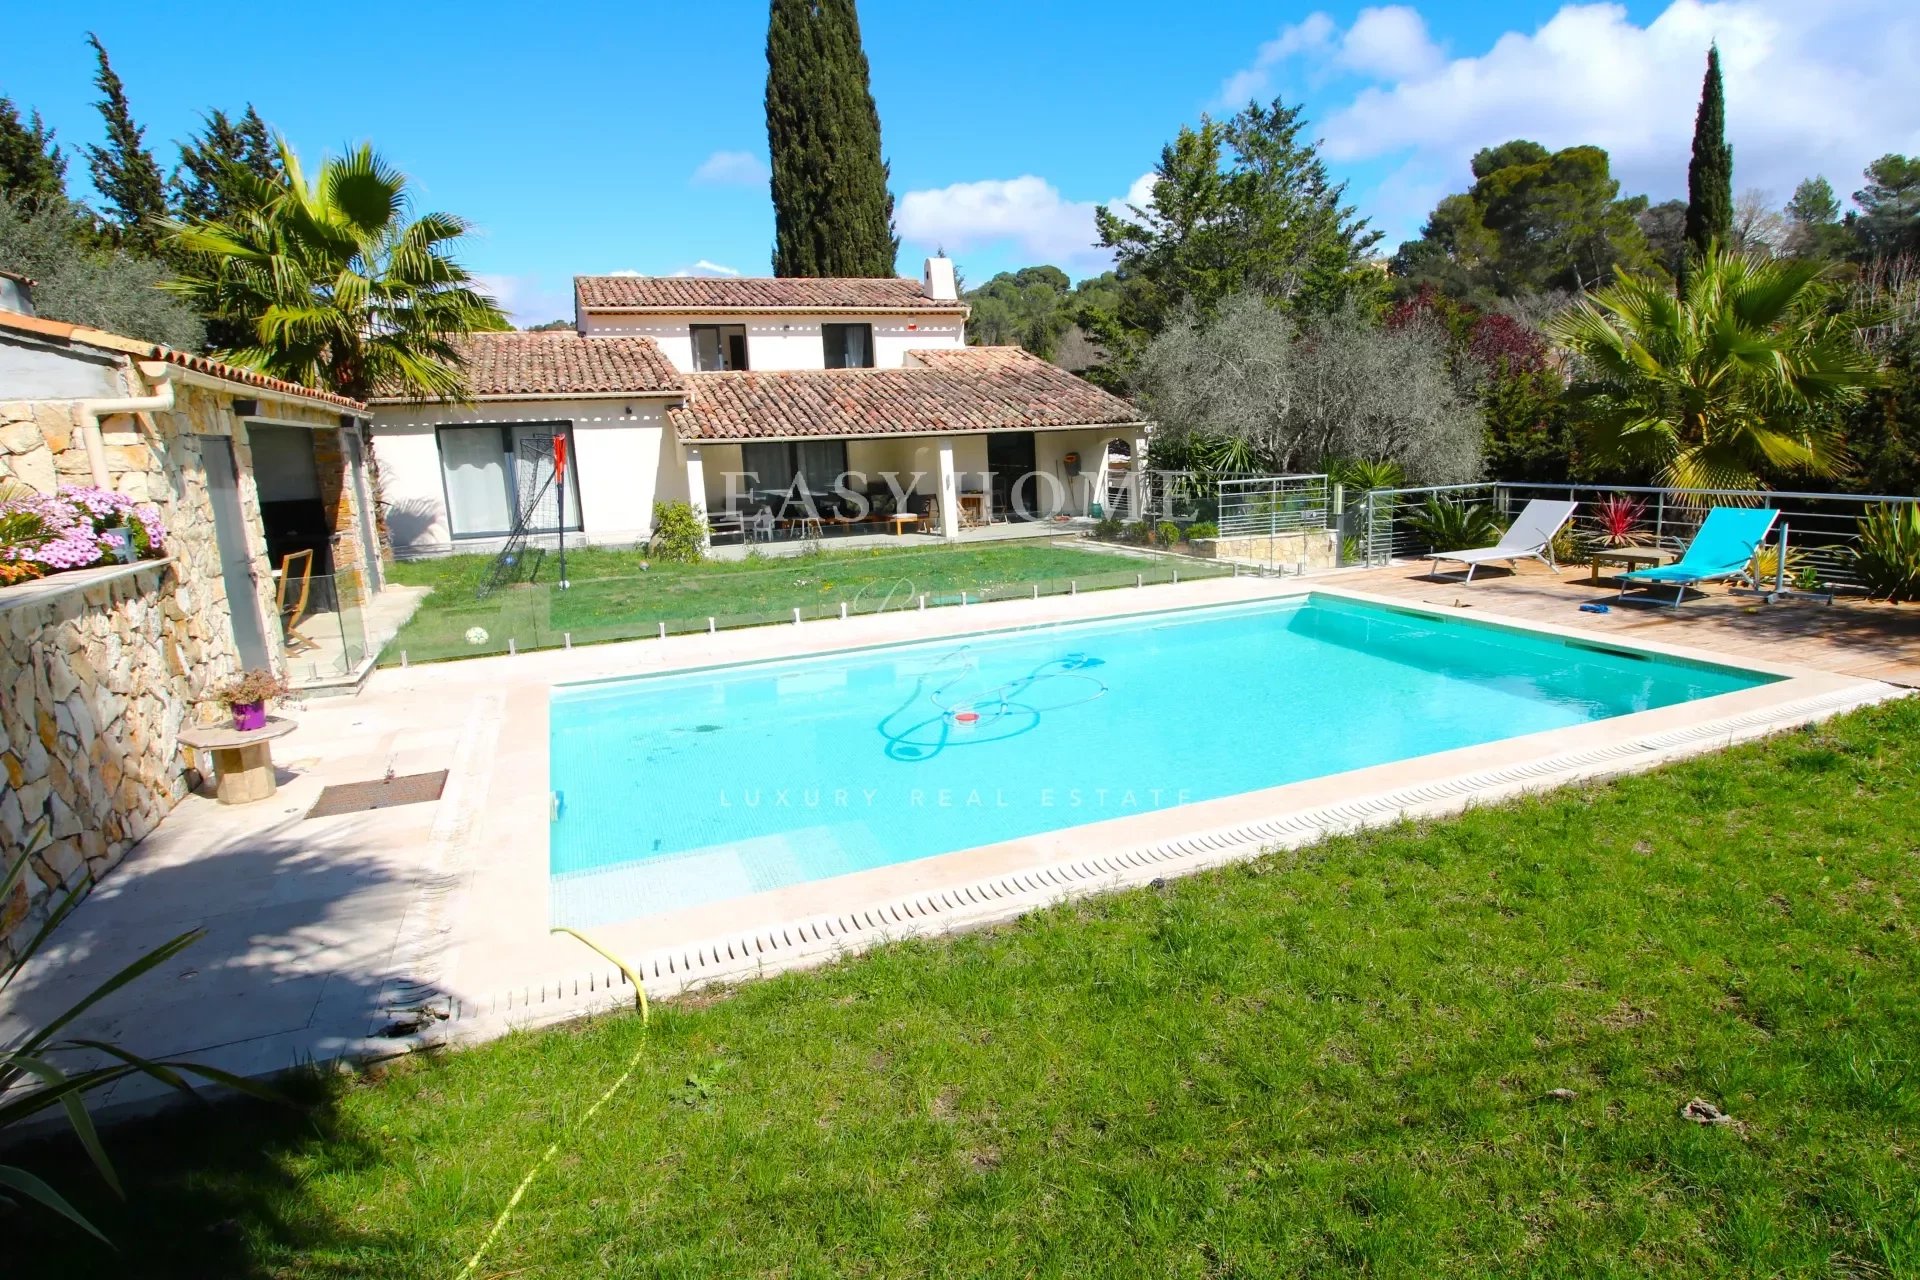 Purchase/Sale Villa Mougins with possibility of building a 2nd villa